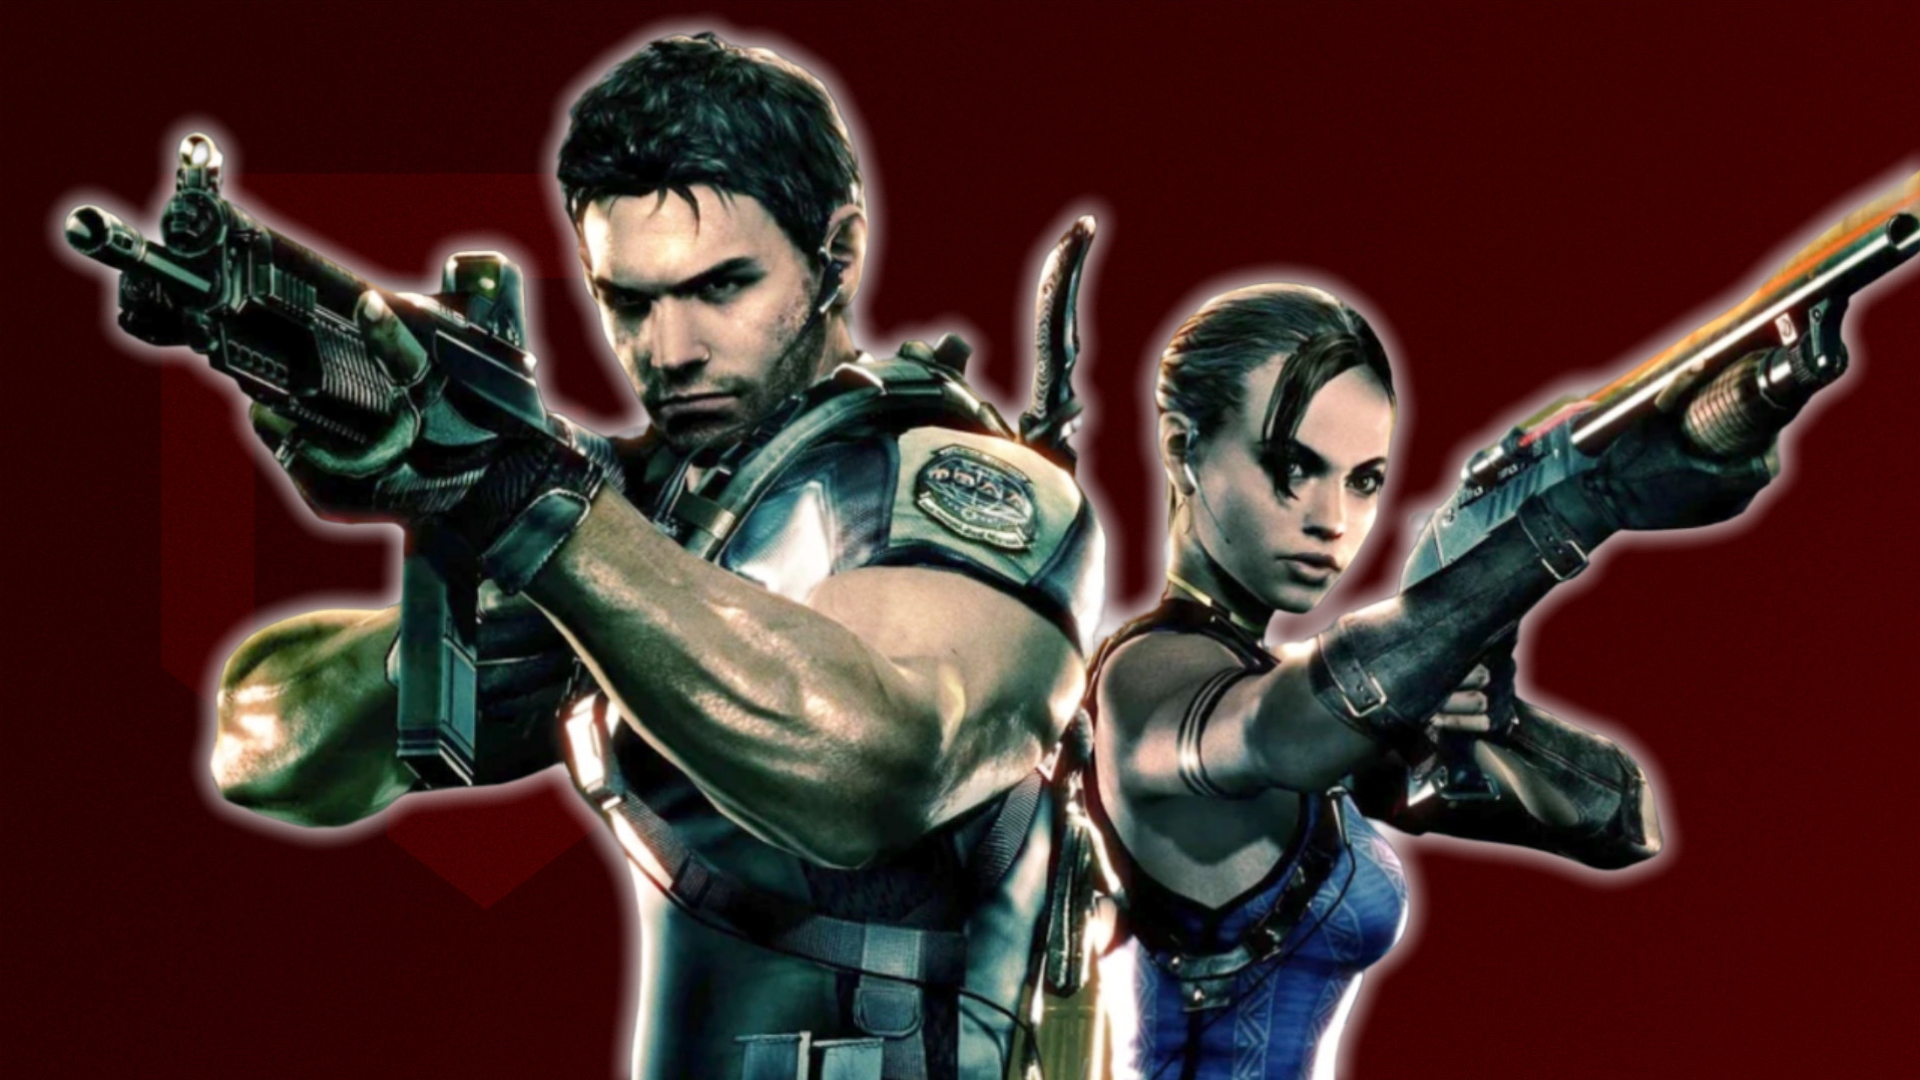 I would love to see a remake of code veronica after re4, but a resident evil  5 remake would be pretty cool too! This is my concept of how it could look